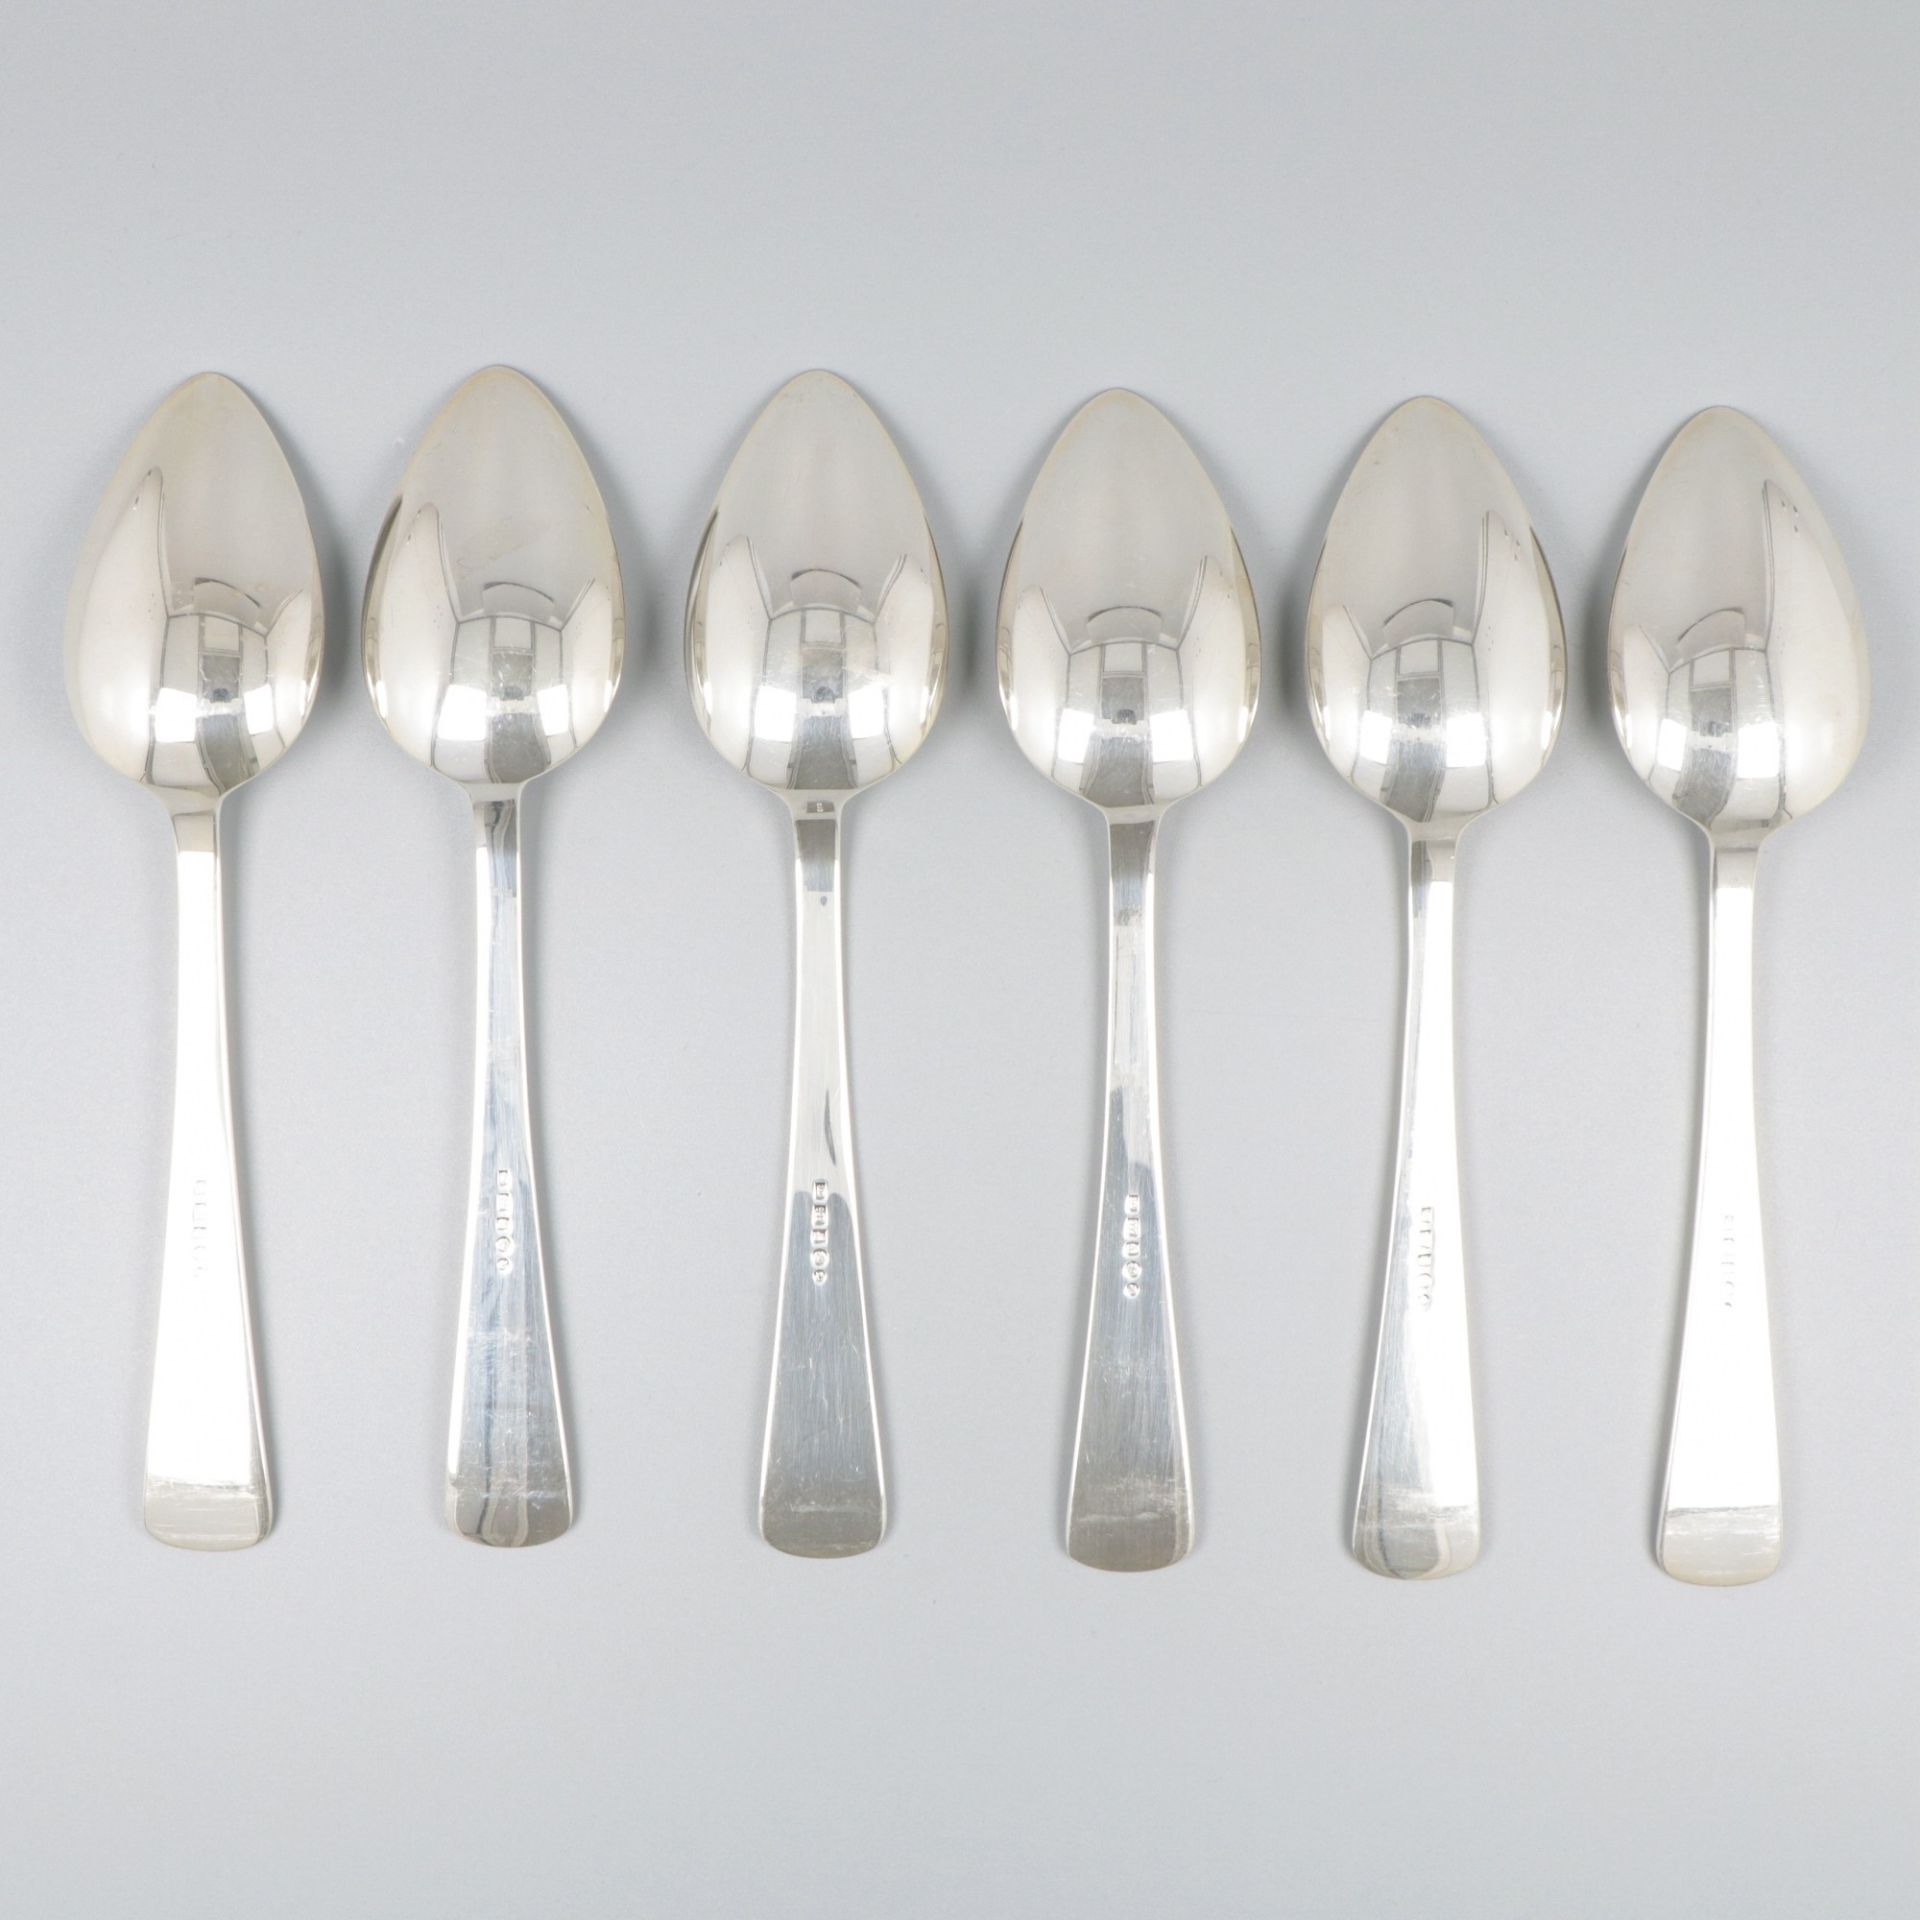 6-piece set of spoons ''Haags Lofje'' silver. - Image 2 of 5